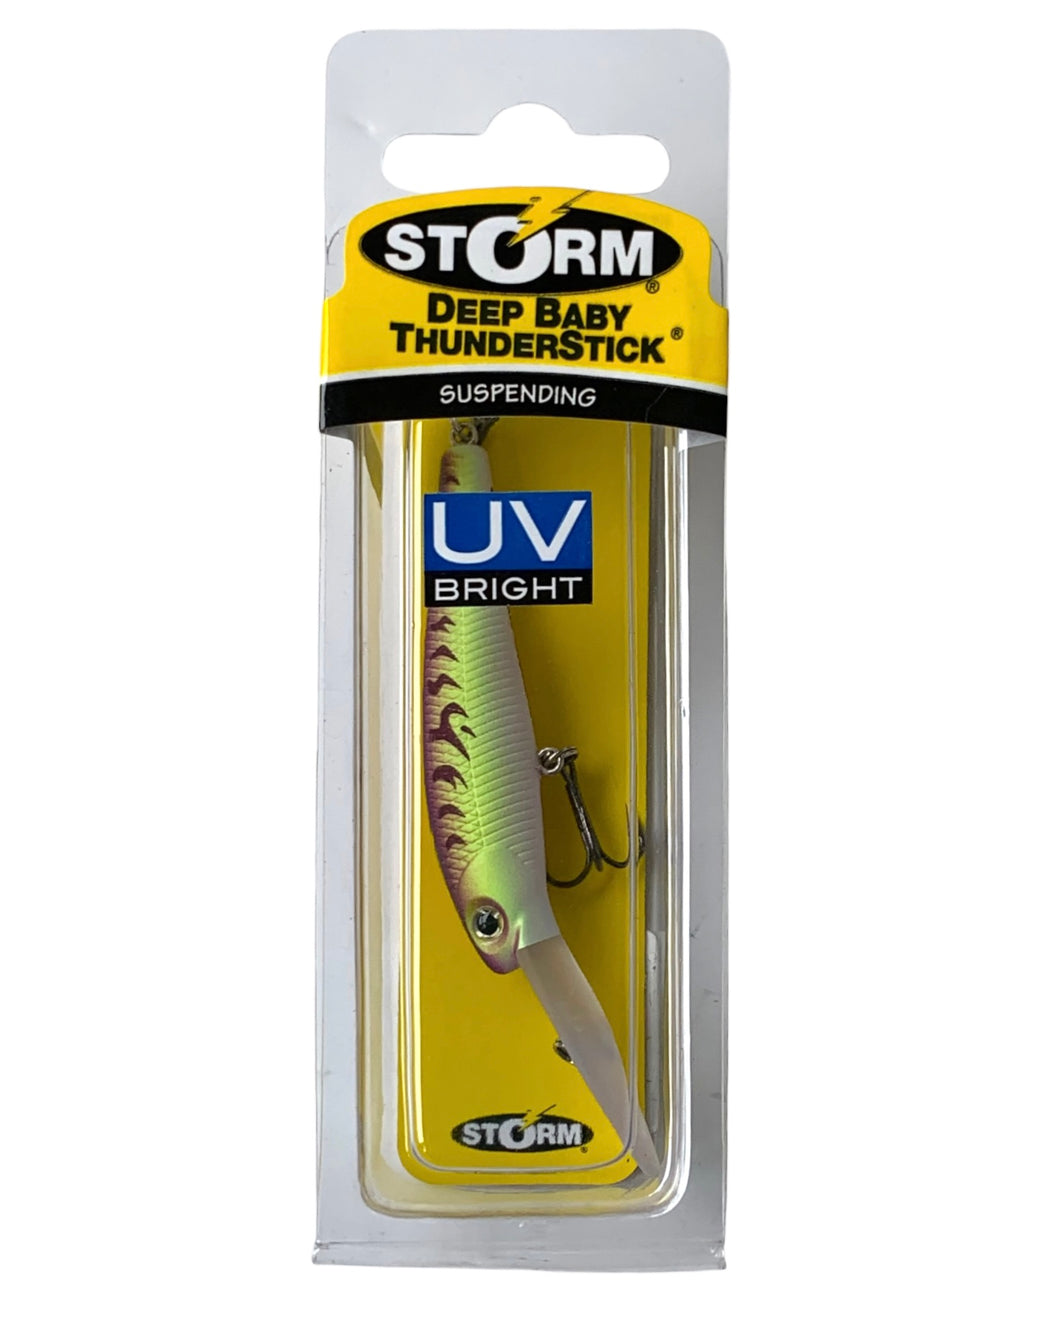 STORM LURES 6 cm DEEP BABY THUNDERSTICK Fishing Lure in PURPLE FIRE UV